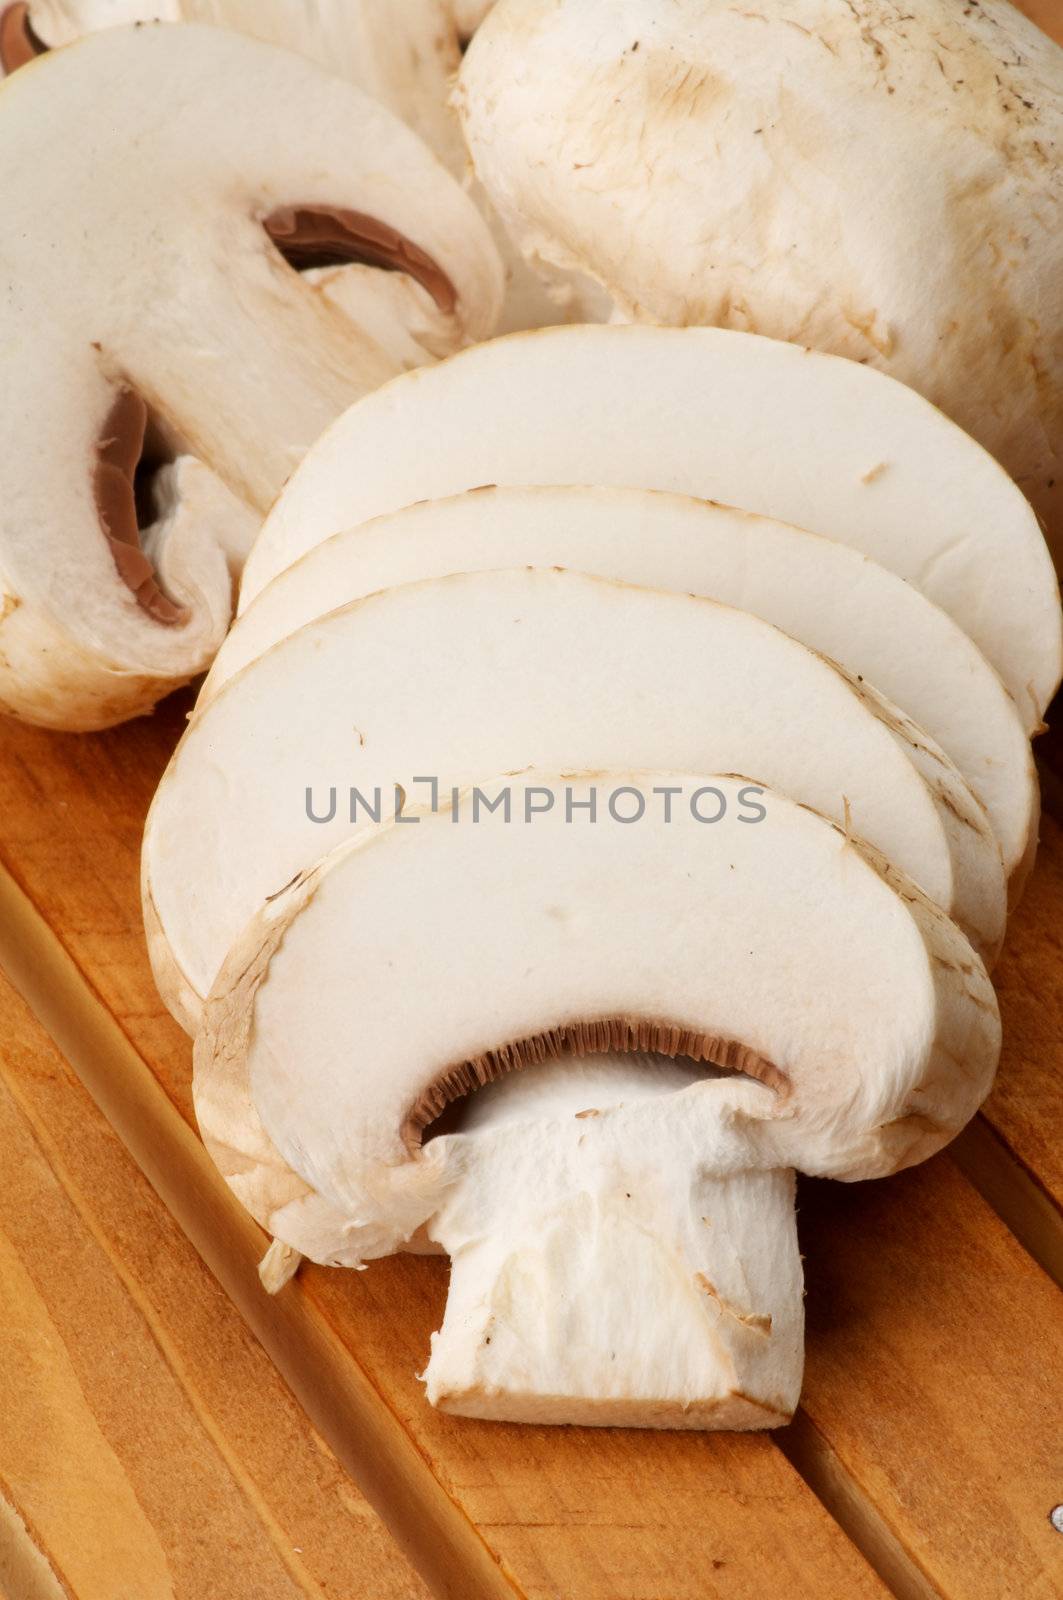 Full Body and Slices of Сhampignon closeup on Wooden background